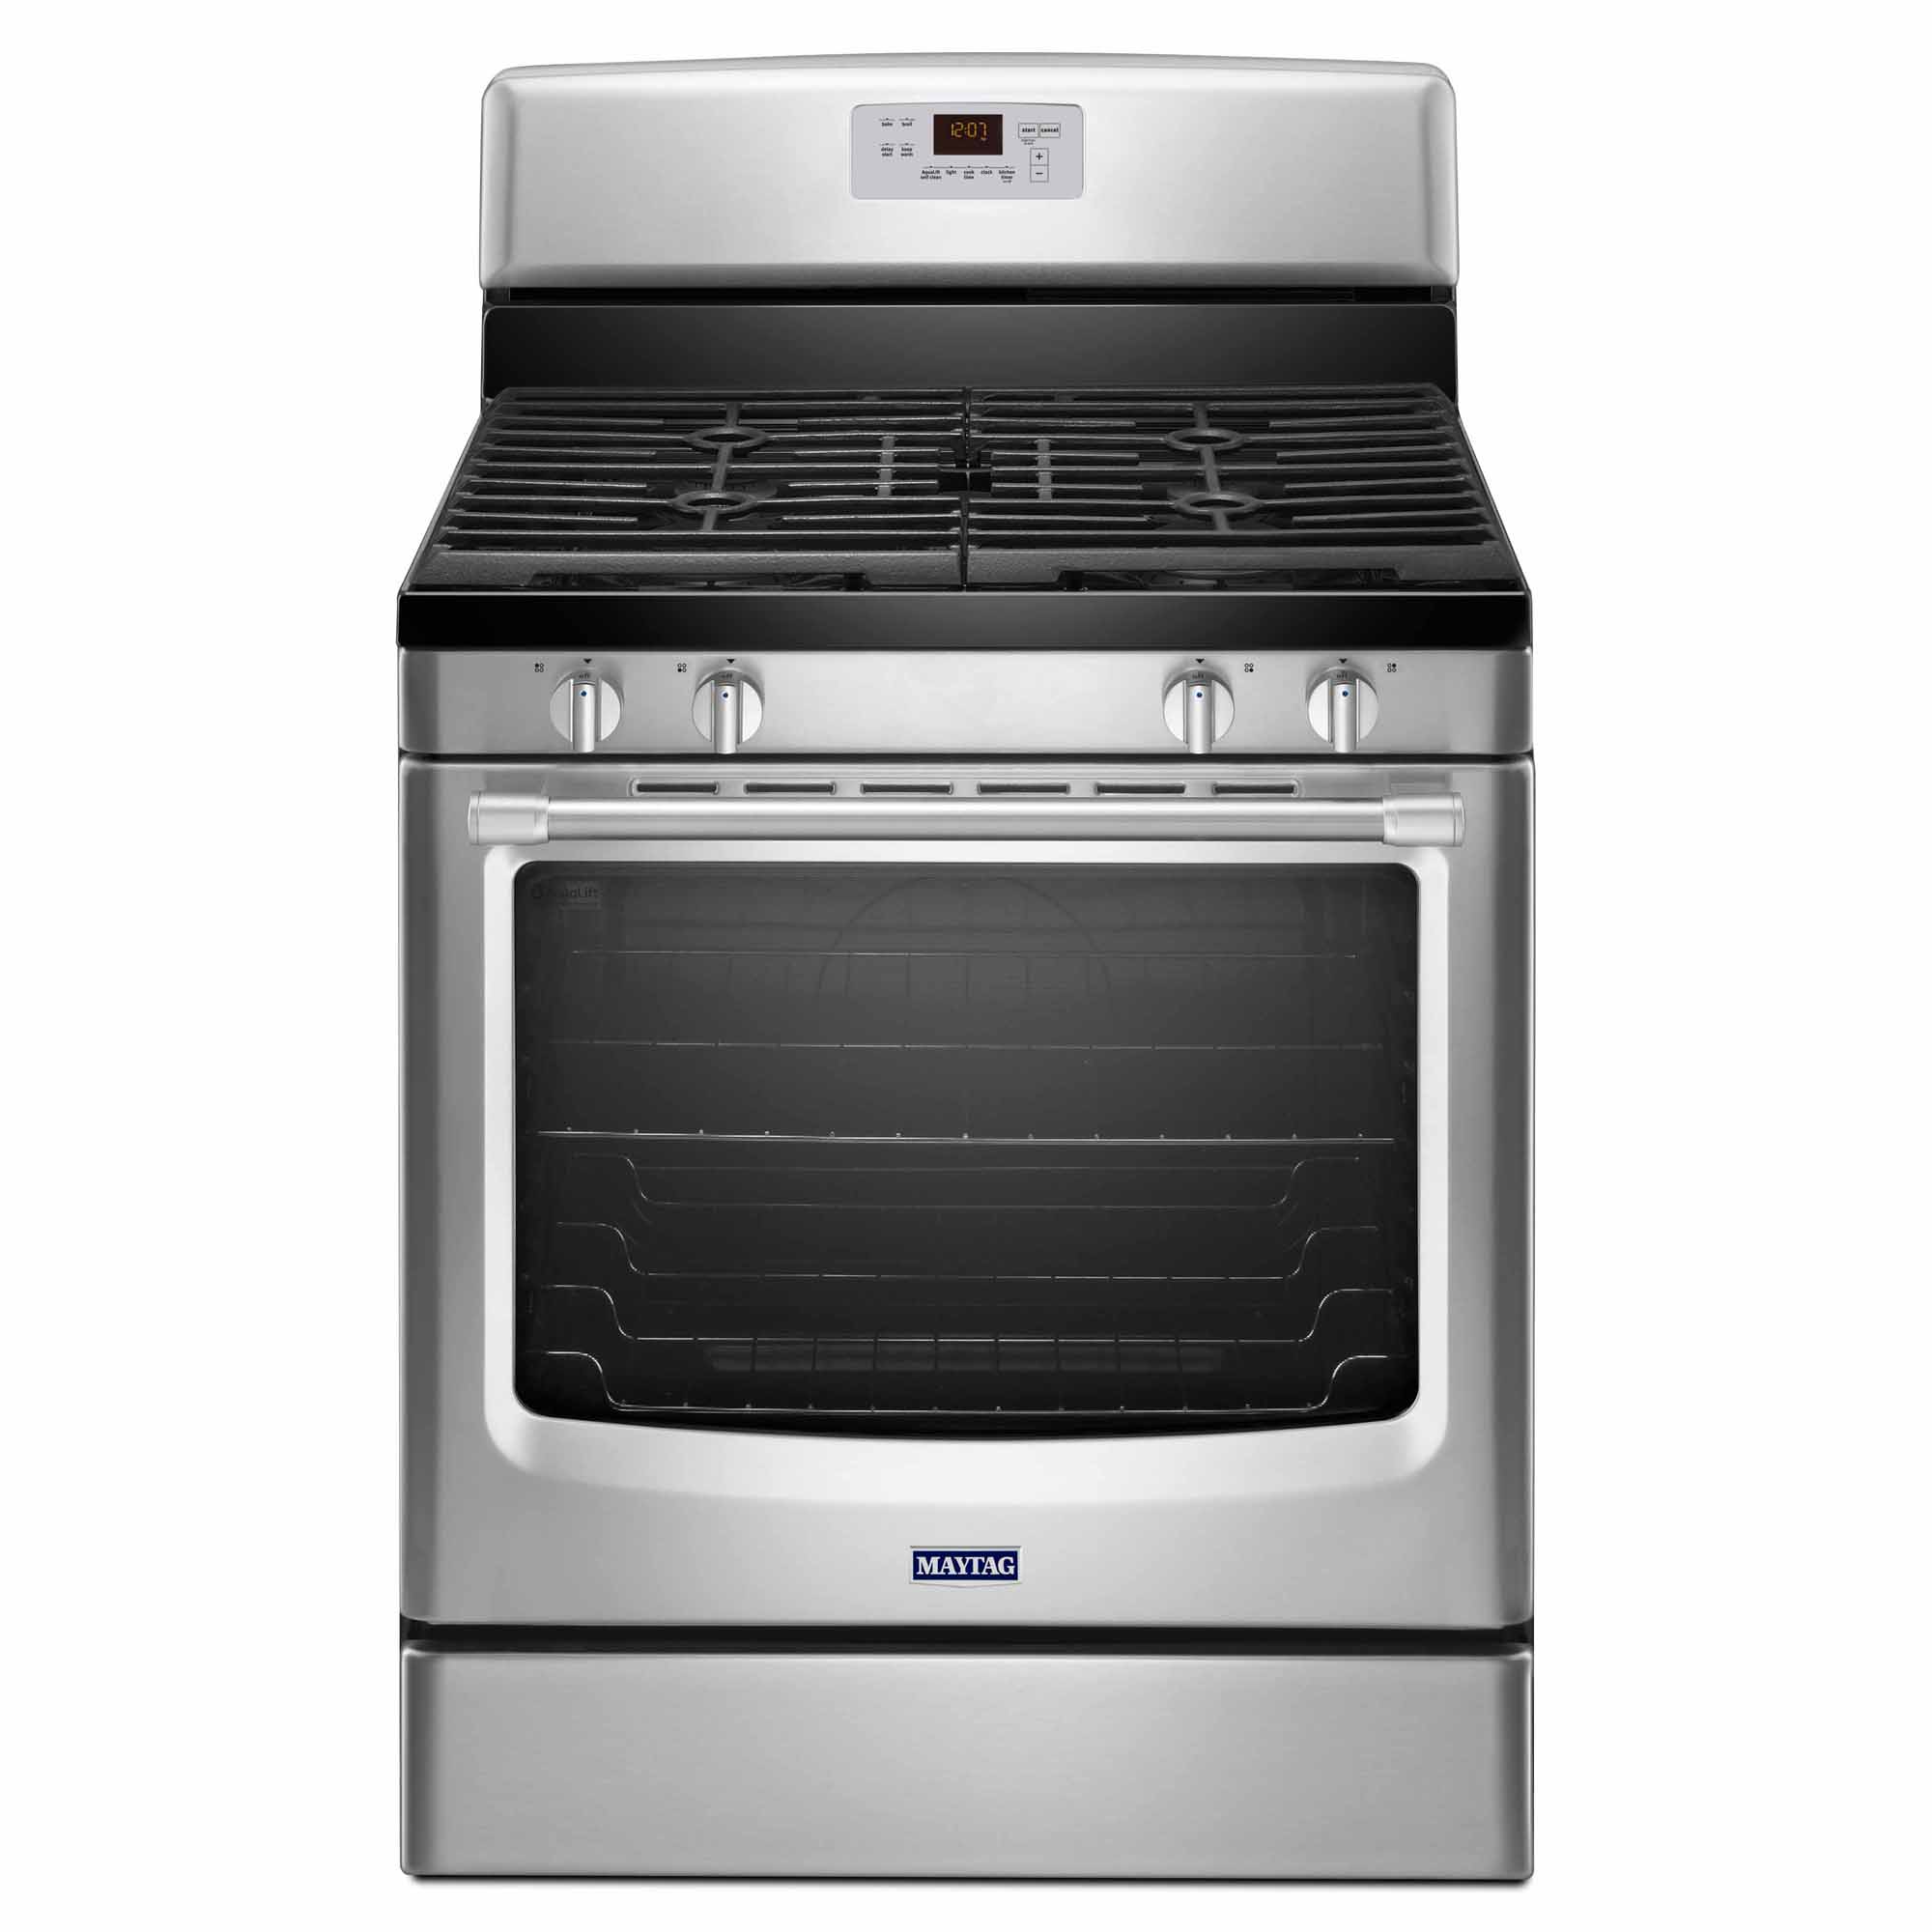 Which businesses offer gas range repairs for Maytag devices?